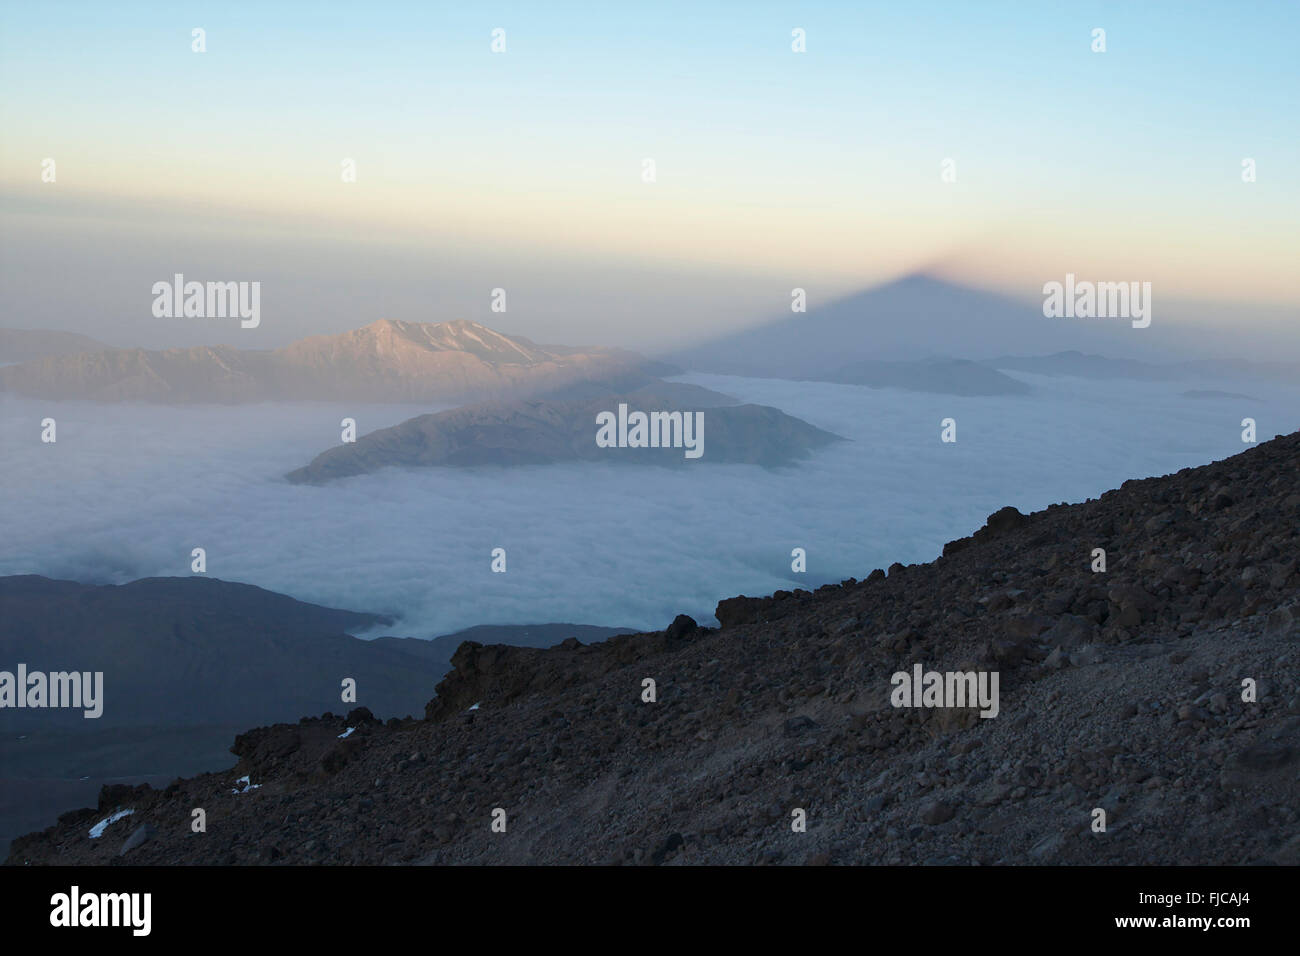 View from the ascent to Mount Damavand across the Alborz mountains, with shadow of the volcano, early morning, Iran Stock Photo